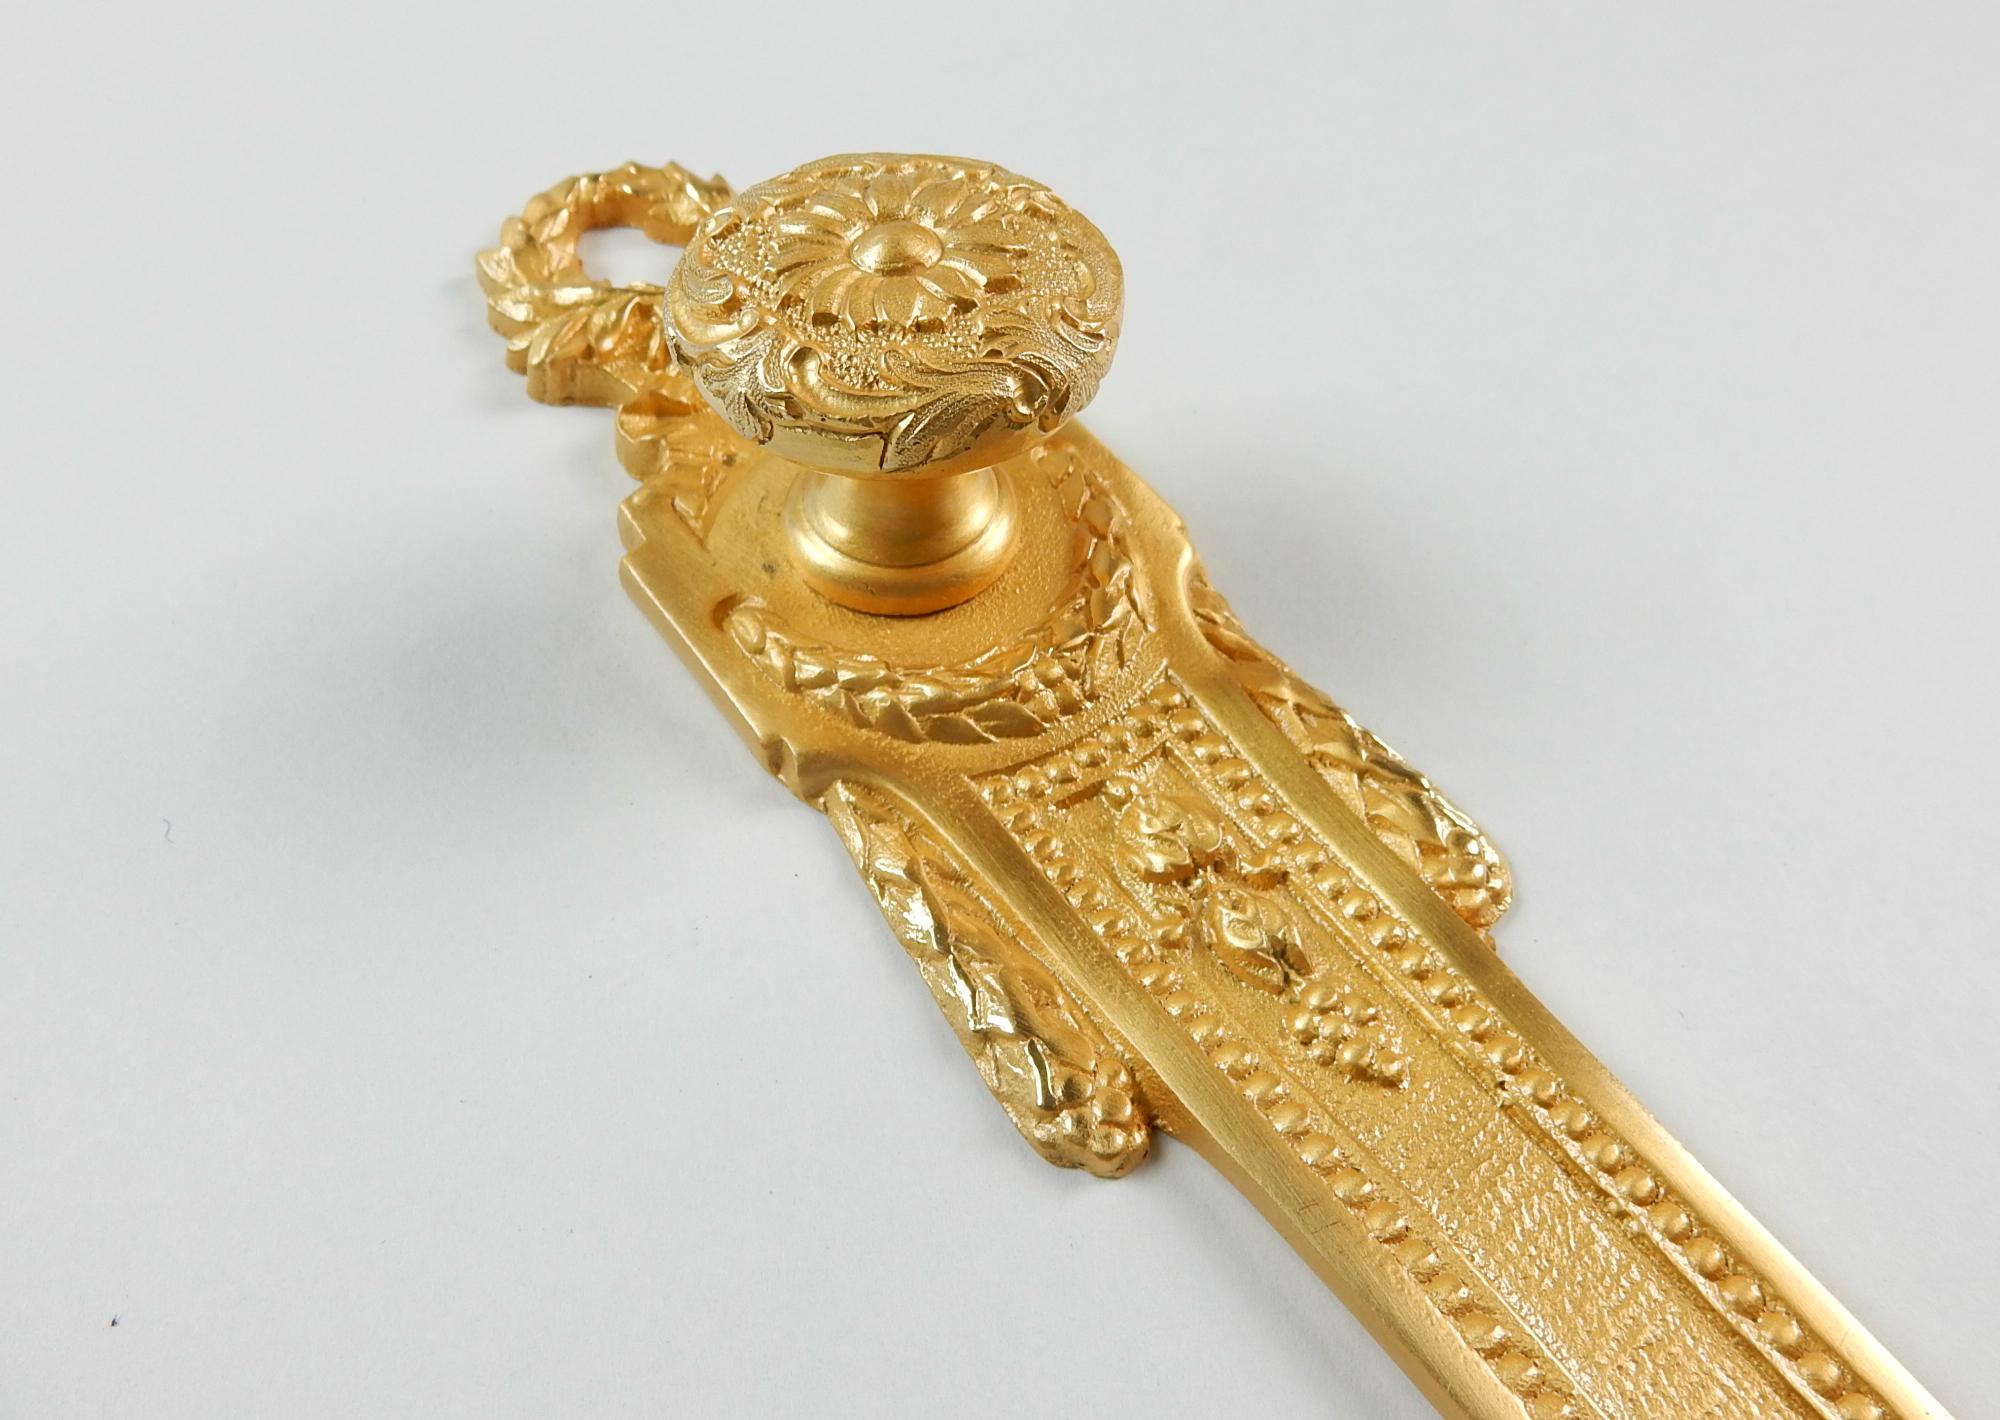 From the Sherle Wagner collection a rare ornate closet or cabinet pull knob with escutcheon.
Both are 22-karat gold plated finish. Escutcheon is 8